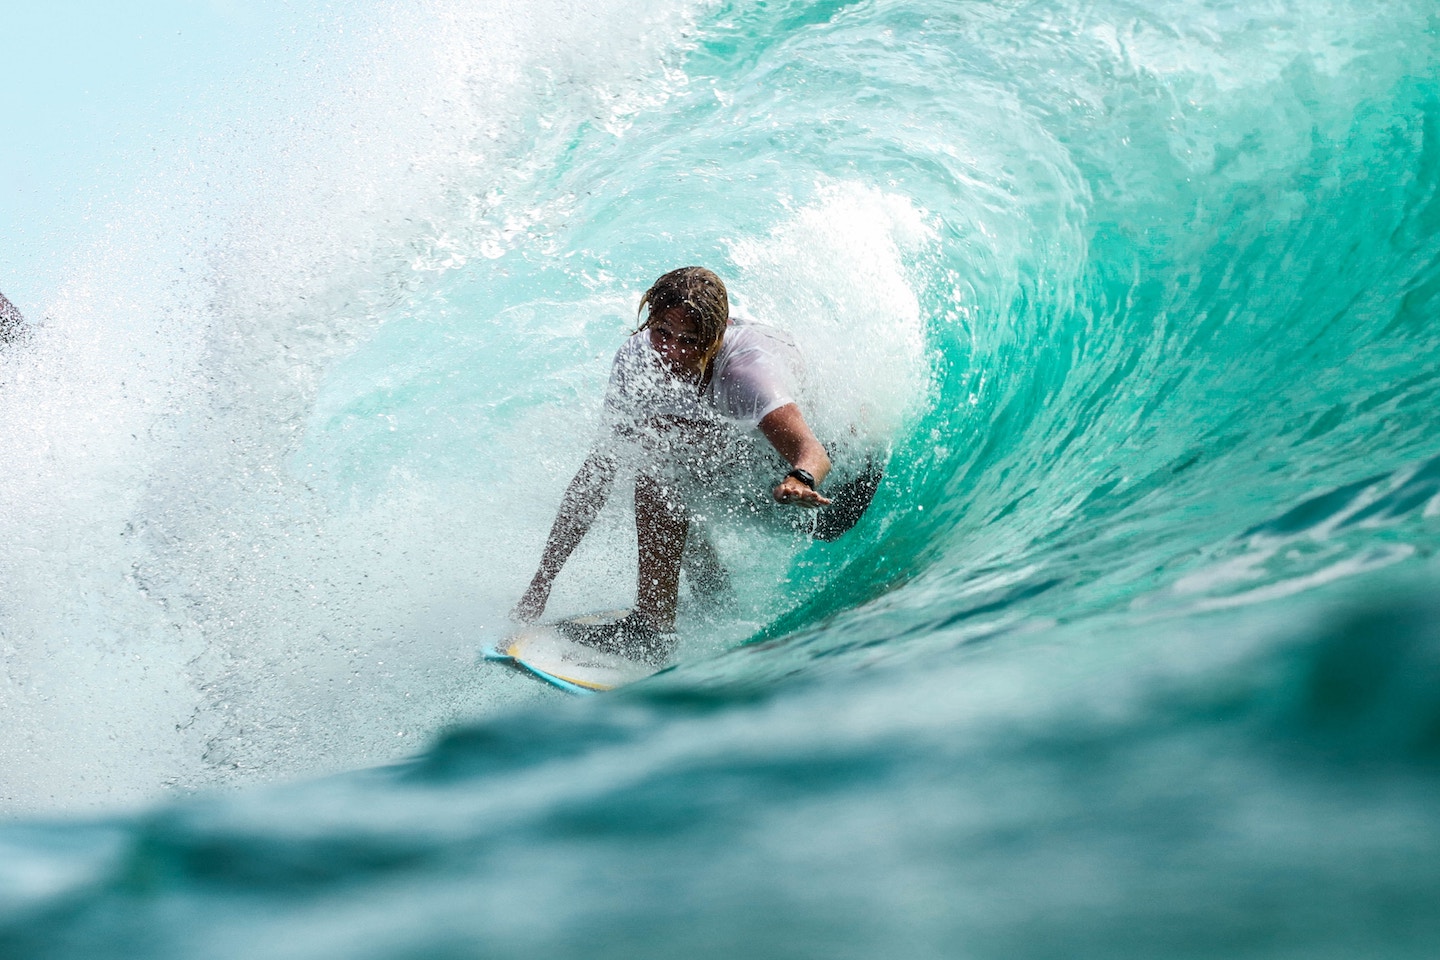 Surfer Jobs - Finding Work to Support a Surf Lifestyle